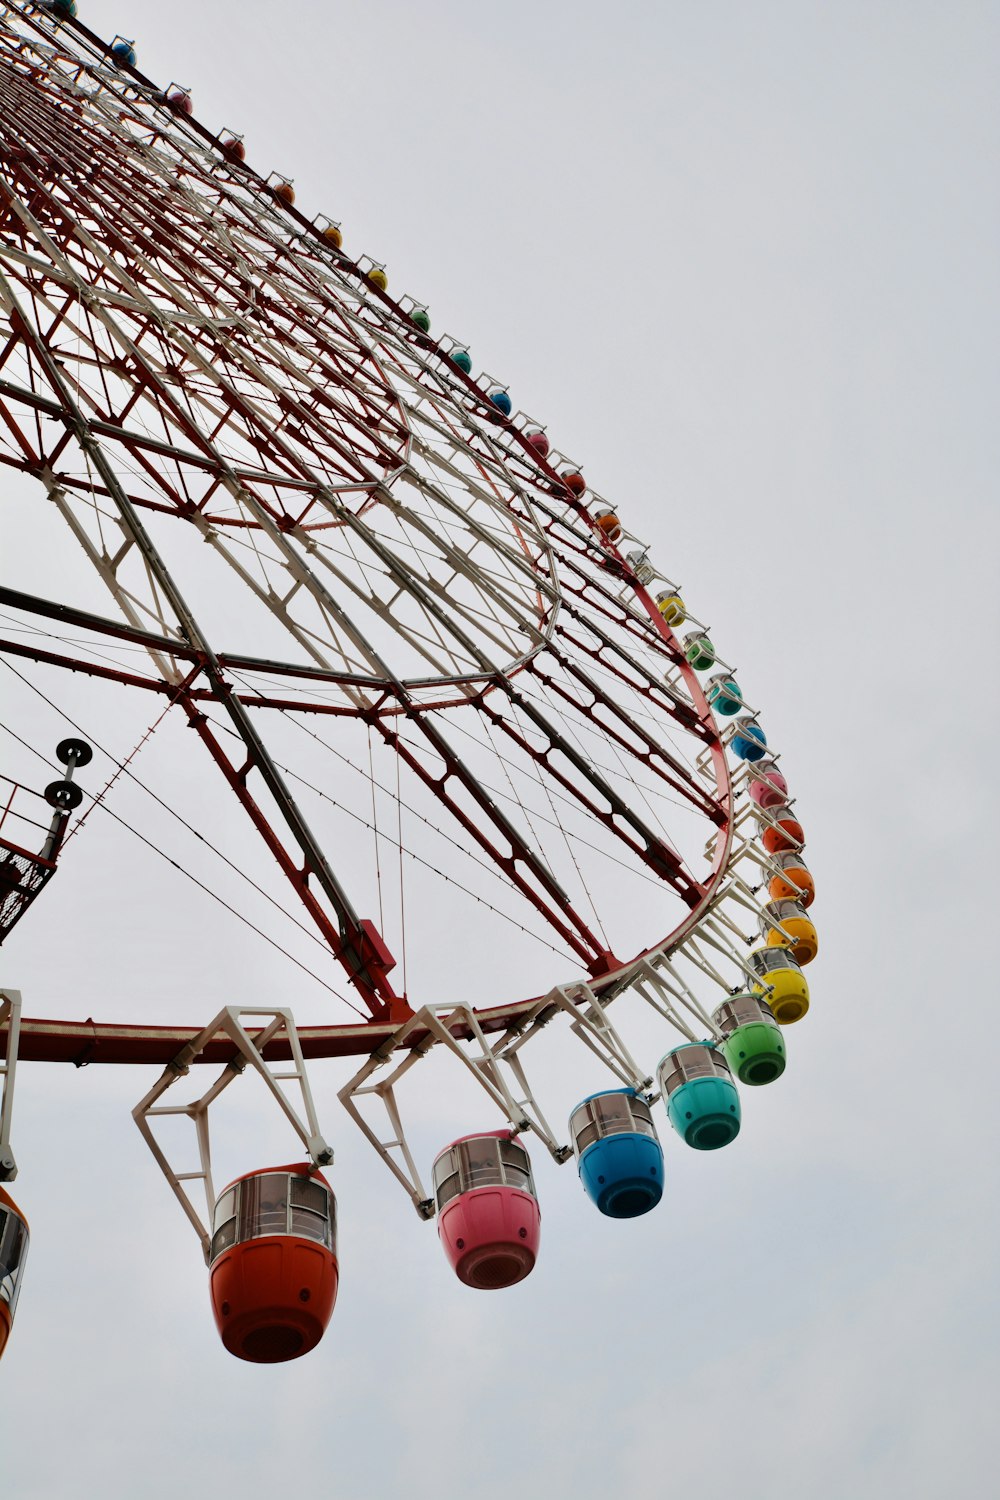 architectural photography of red and white ferris wheel